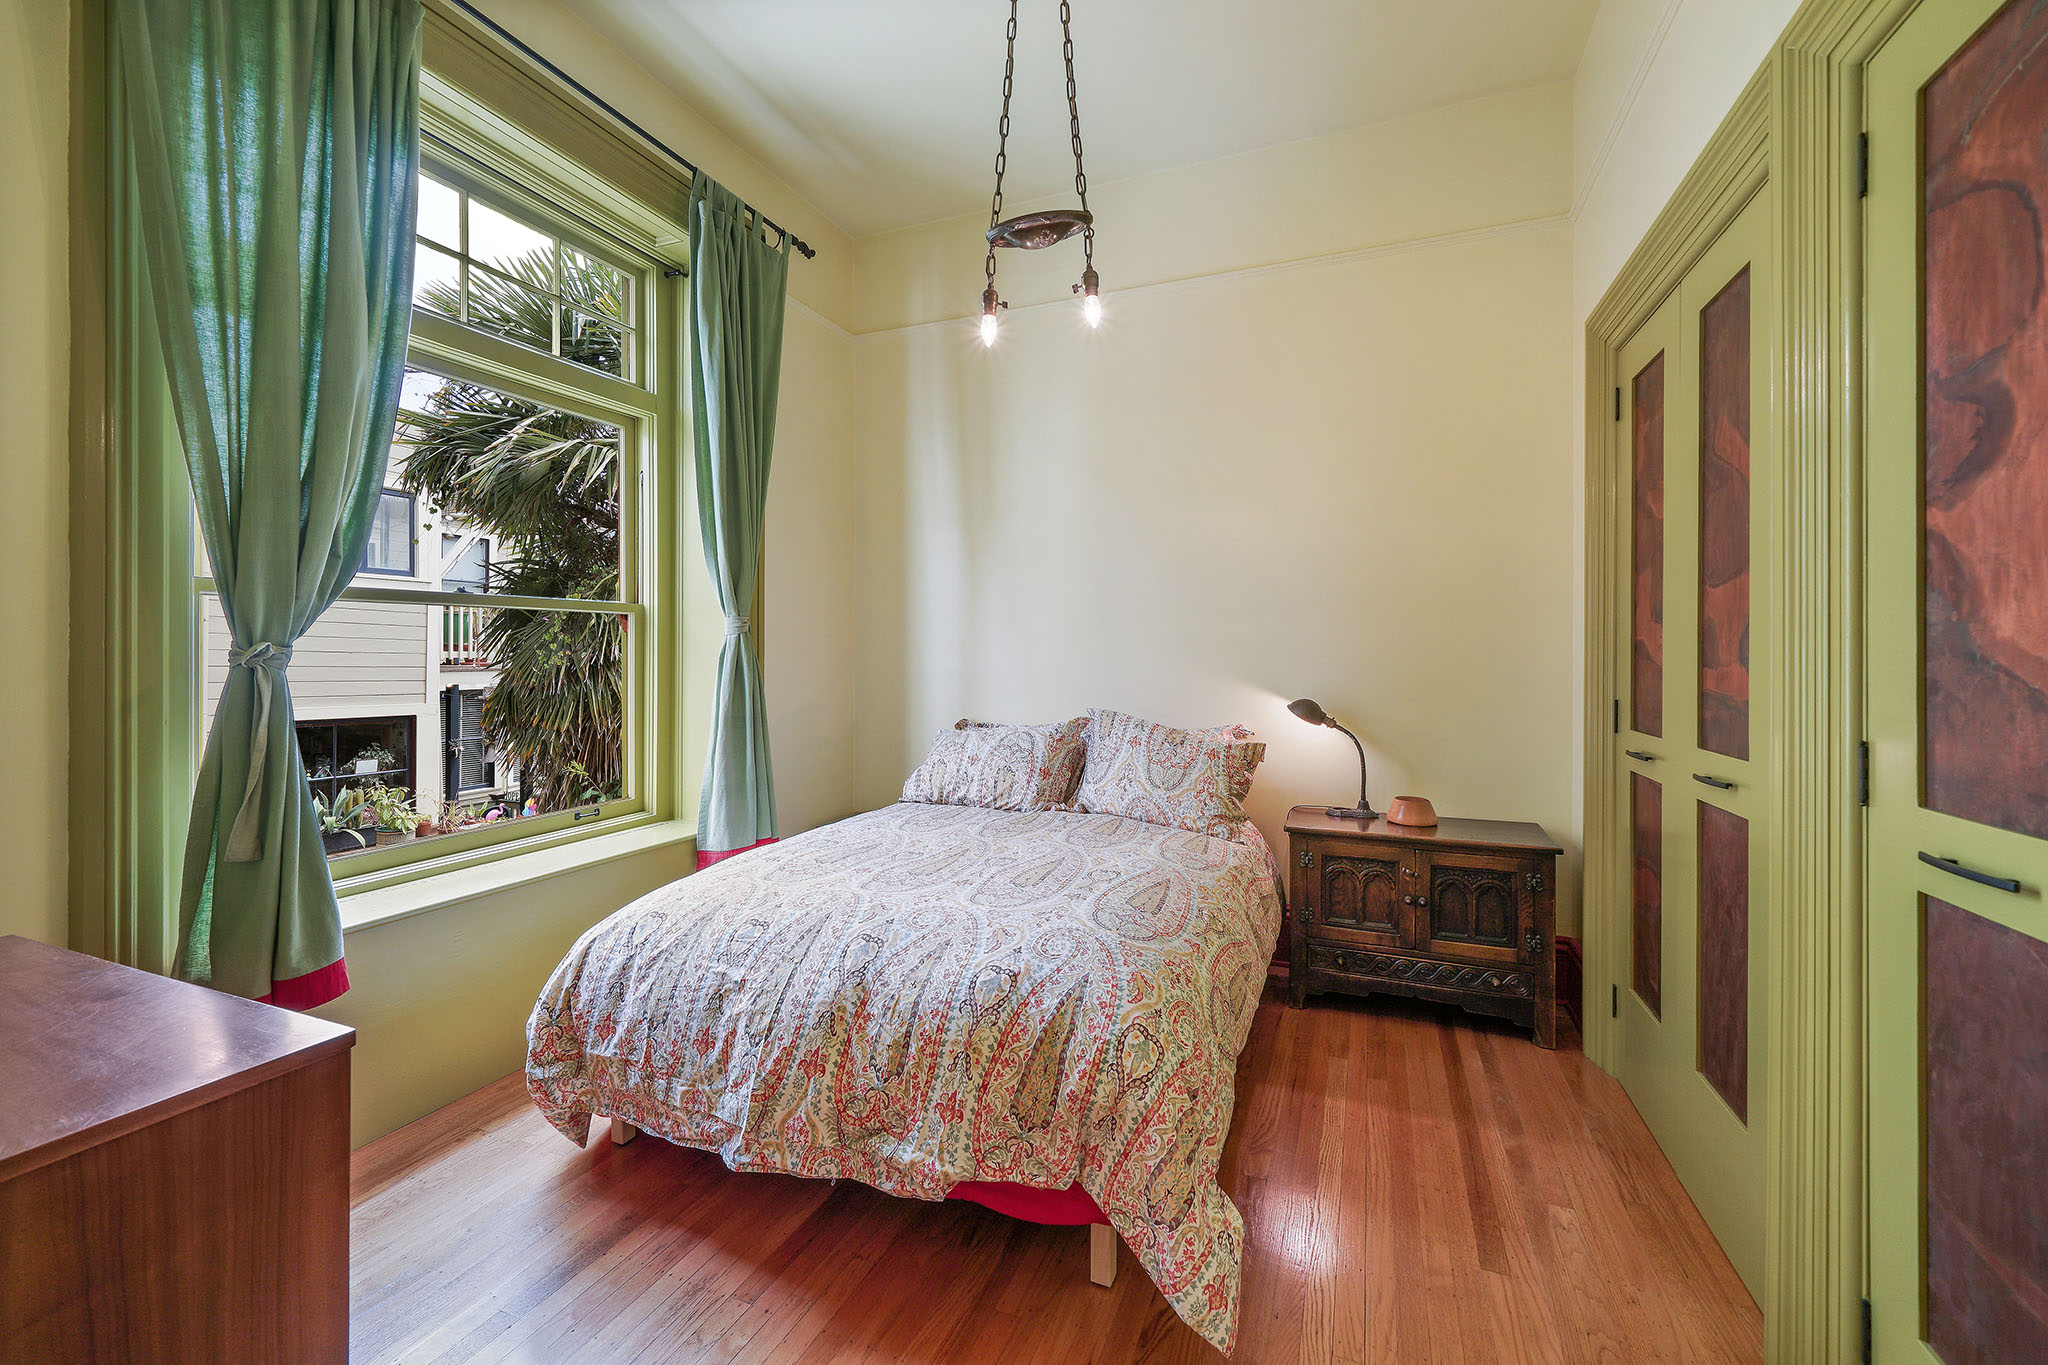 Property Photo: Bedroom with large windows, wood floors and a vintage light fixture